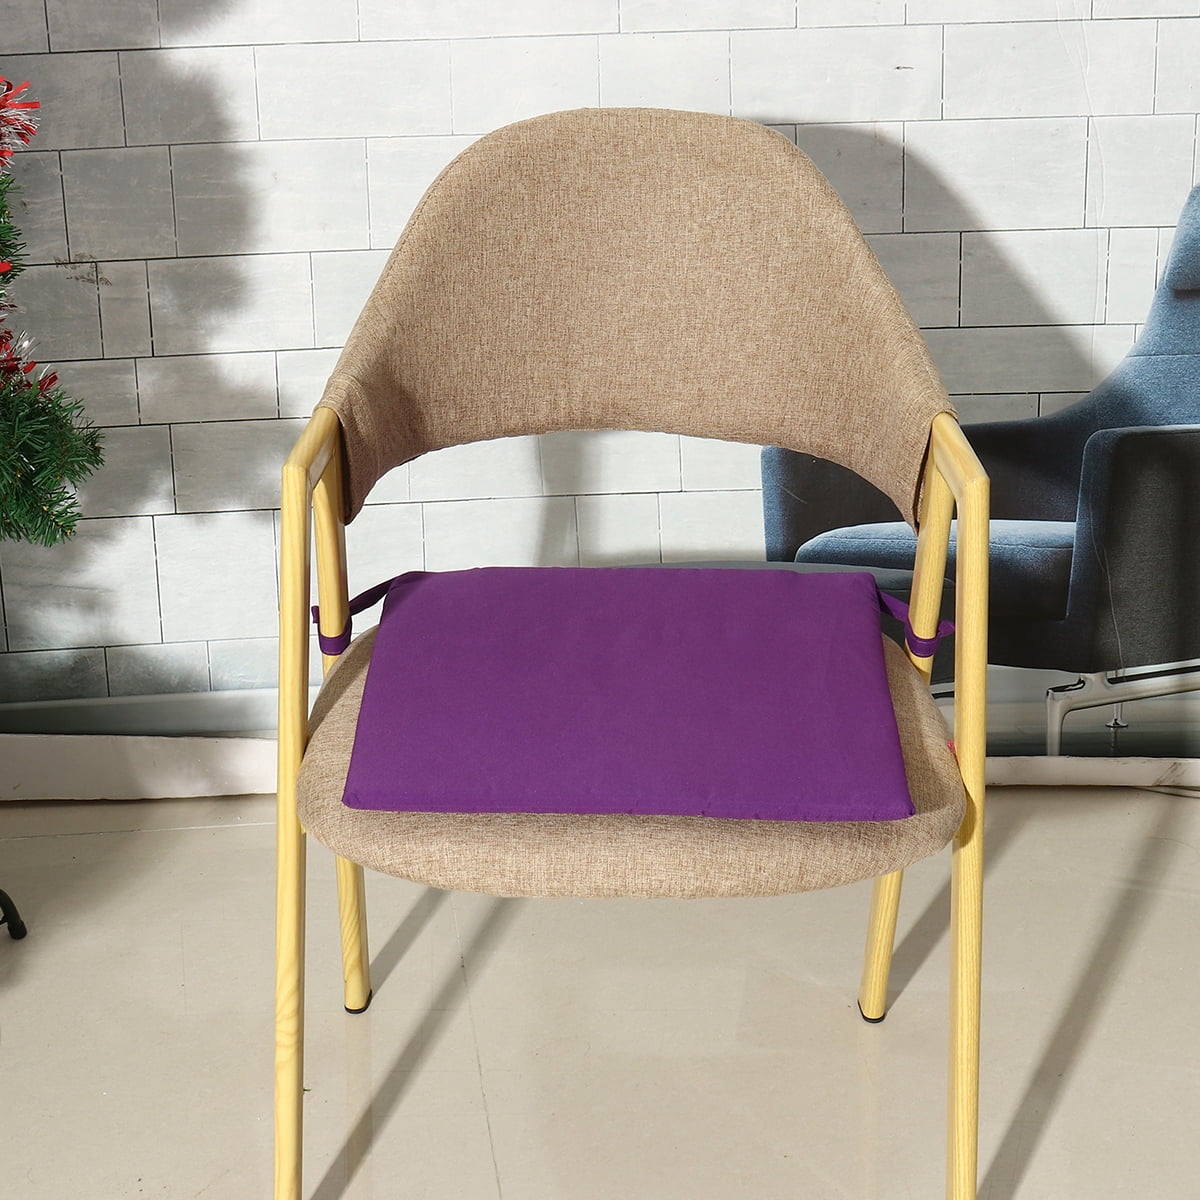 Purple Soft Comfort Sit Mat Indoor Outdoor Chair Seat Cushion Pads For